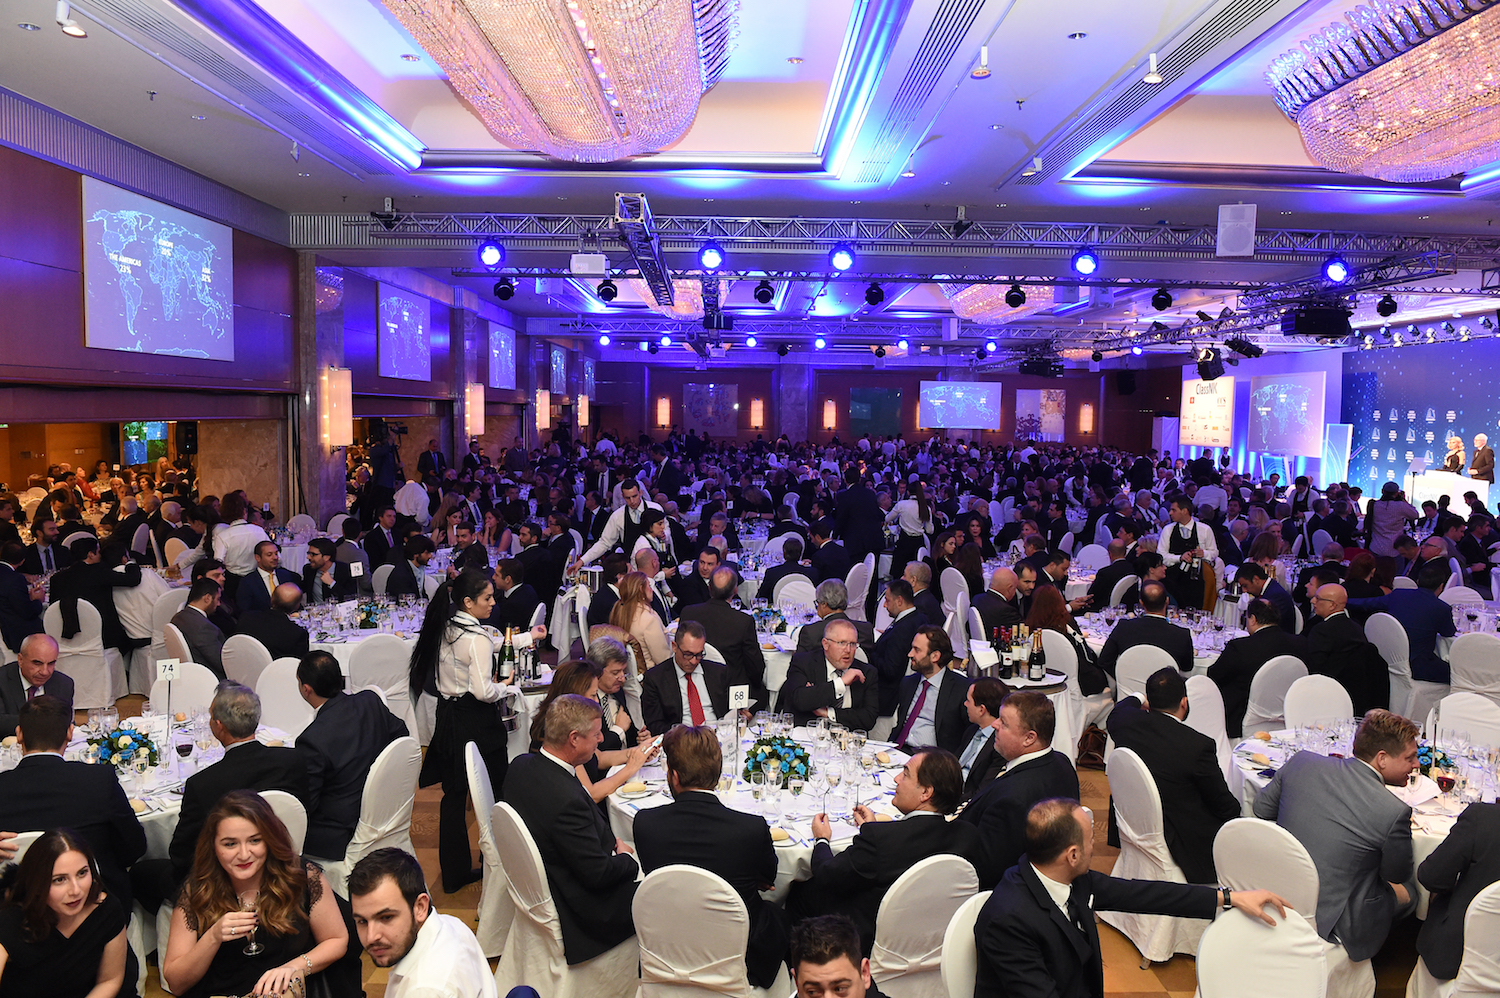 A record attendance of 1,200 guests attended the 2016 event